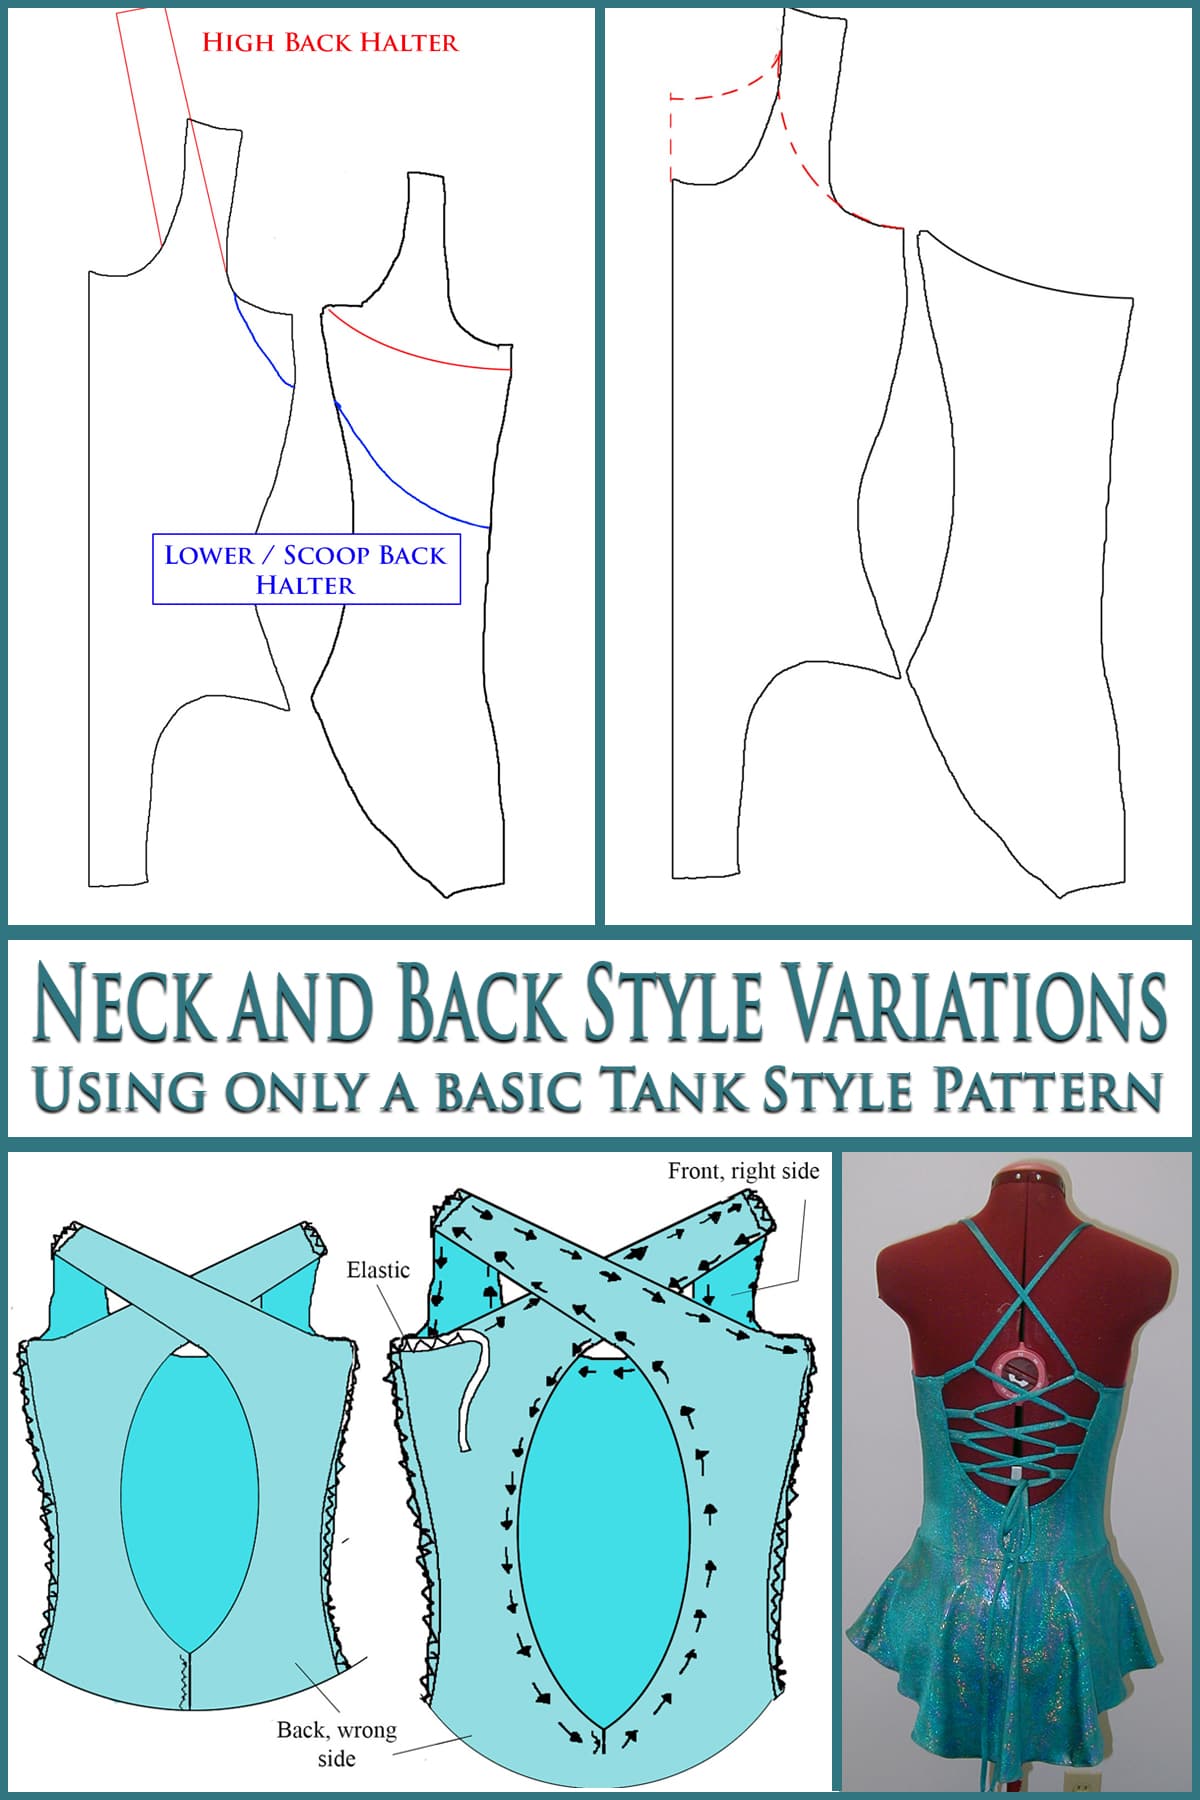 Compilation image of several of the diagrams in this post, combined with text saying Neck and Back Style Variations using only a basic tank style pattern.